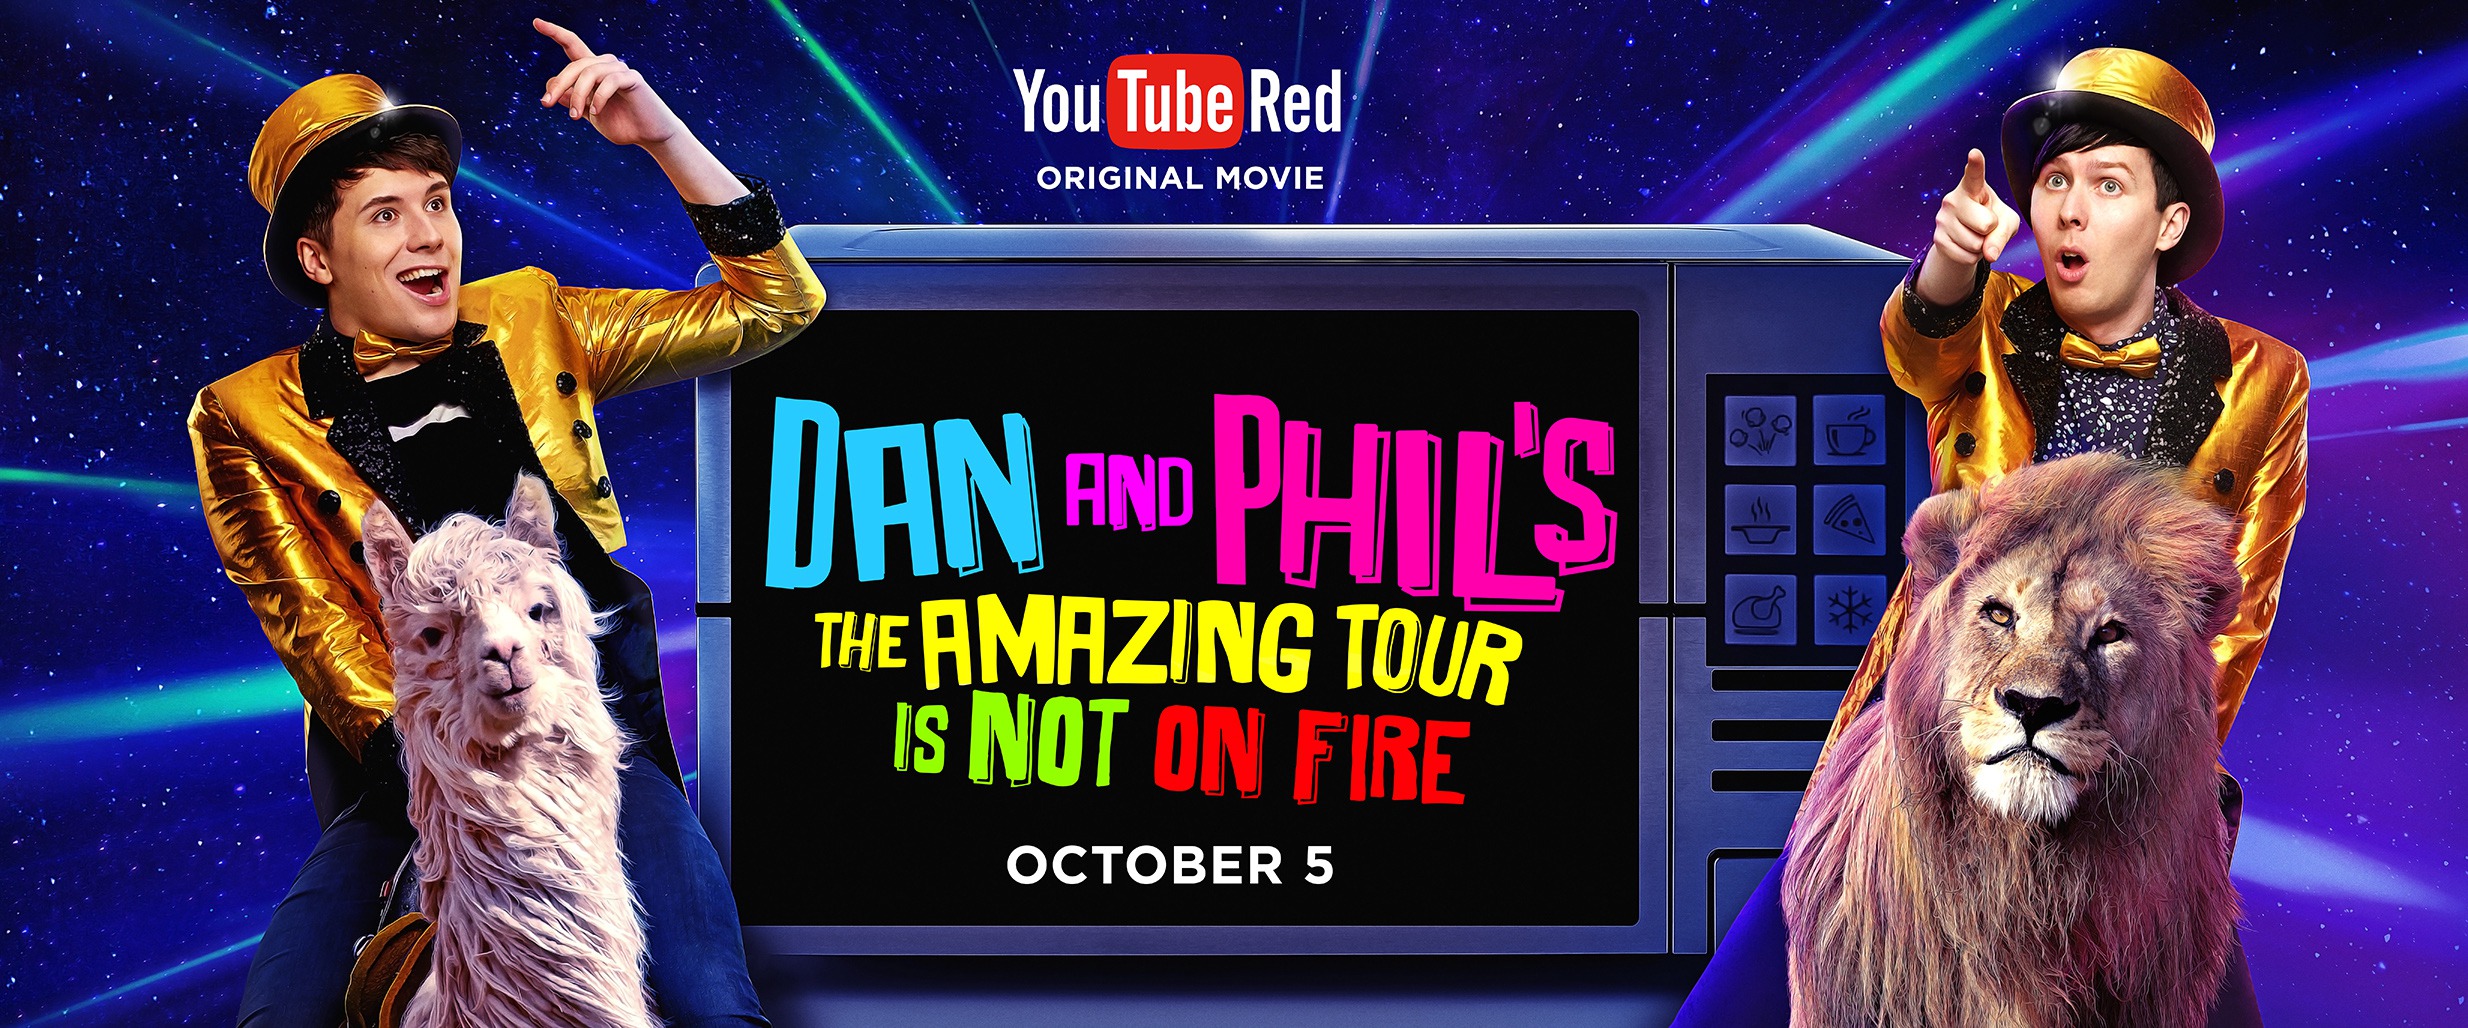 Mega Sized TV Poster Image for Dan and Phil's Story of TATINOF (#2 of 2)